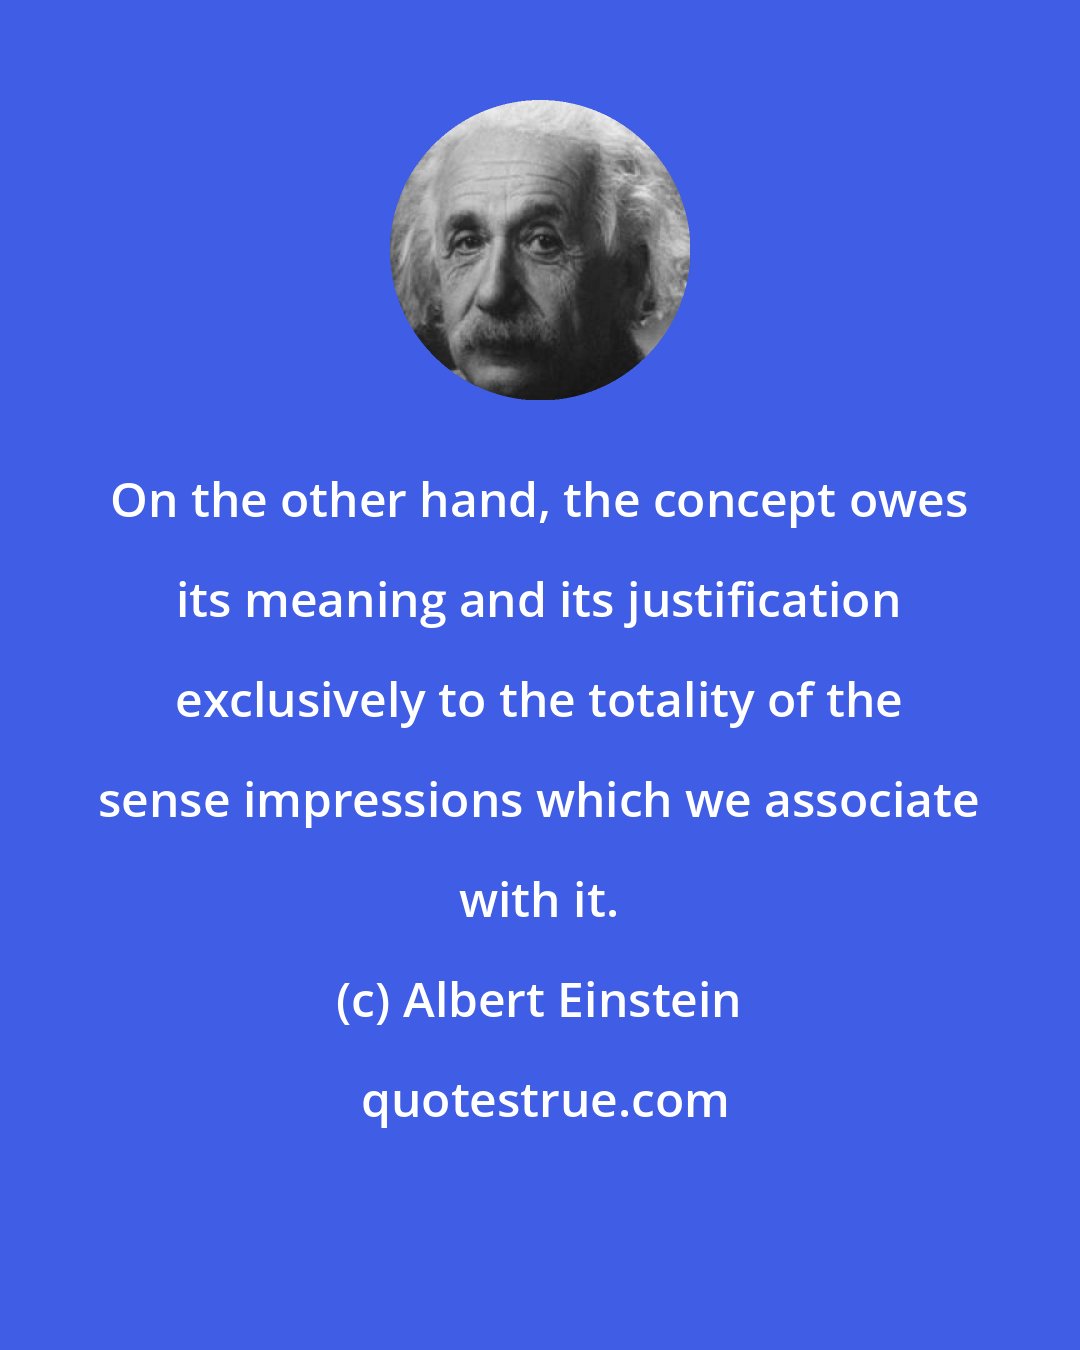 Albert Einstein: On the other hand, the concept owes its meaning and its justification exclusively to the totality of the sense impressions which we associate with it.